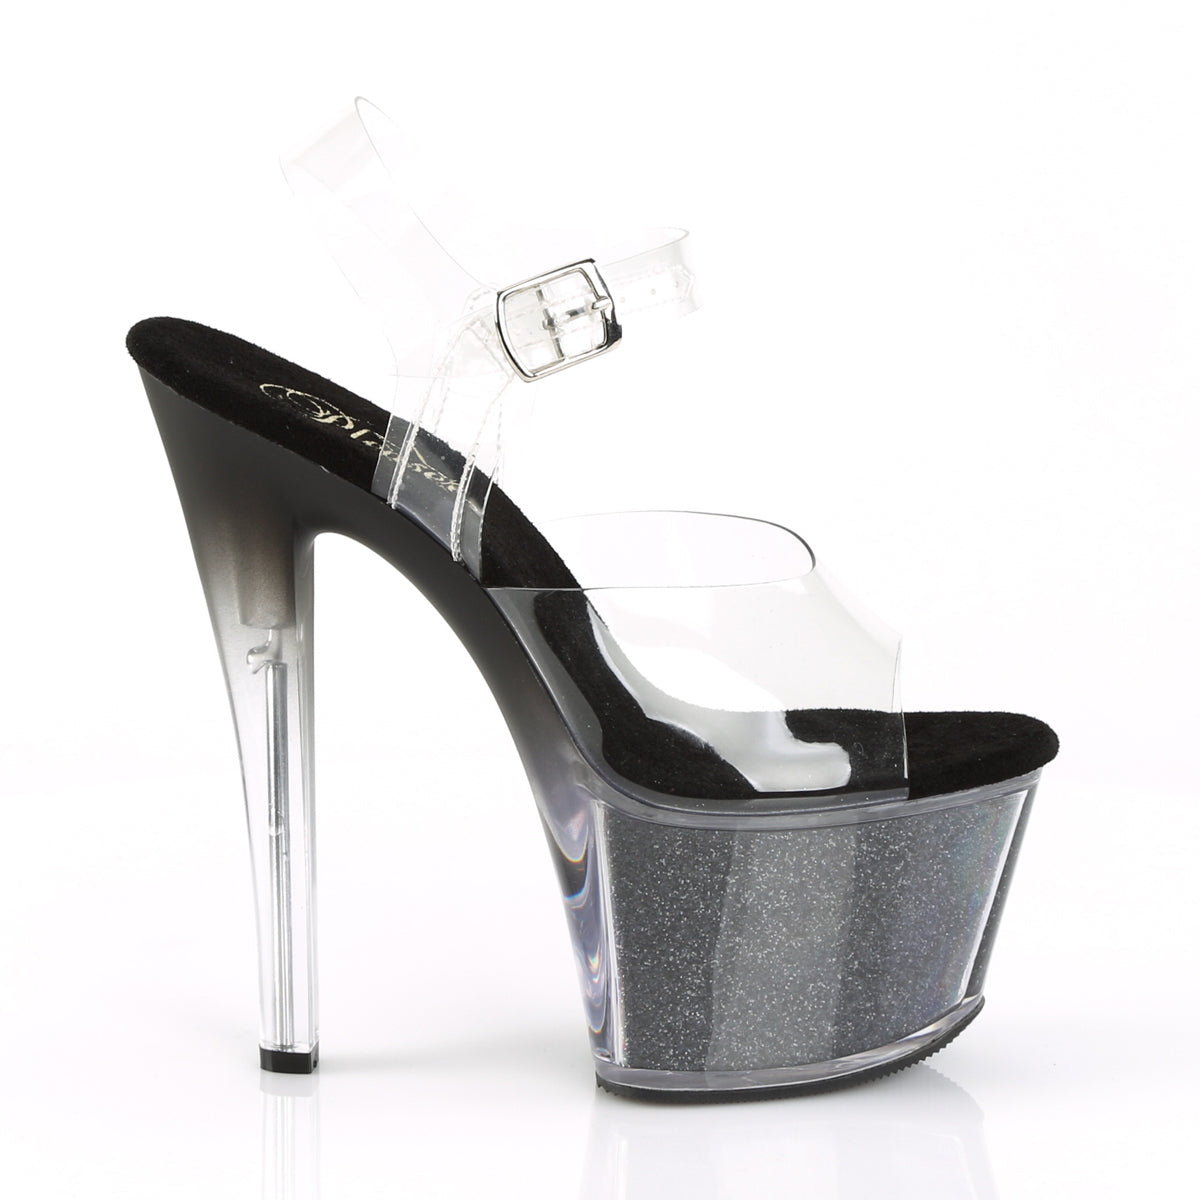 SKY-308G-T 7" Clear and Black Glitter Pole Dancer Platforms-Pleaser- Sexy Shoes Fetish Heels